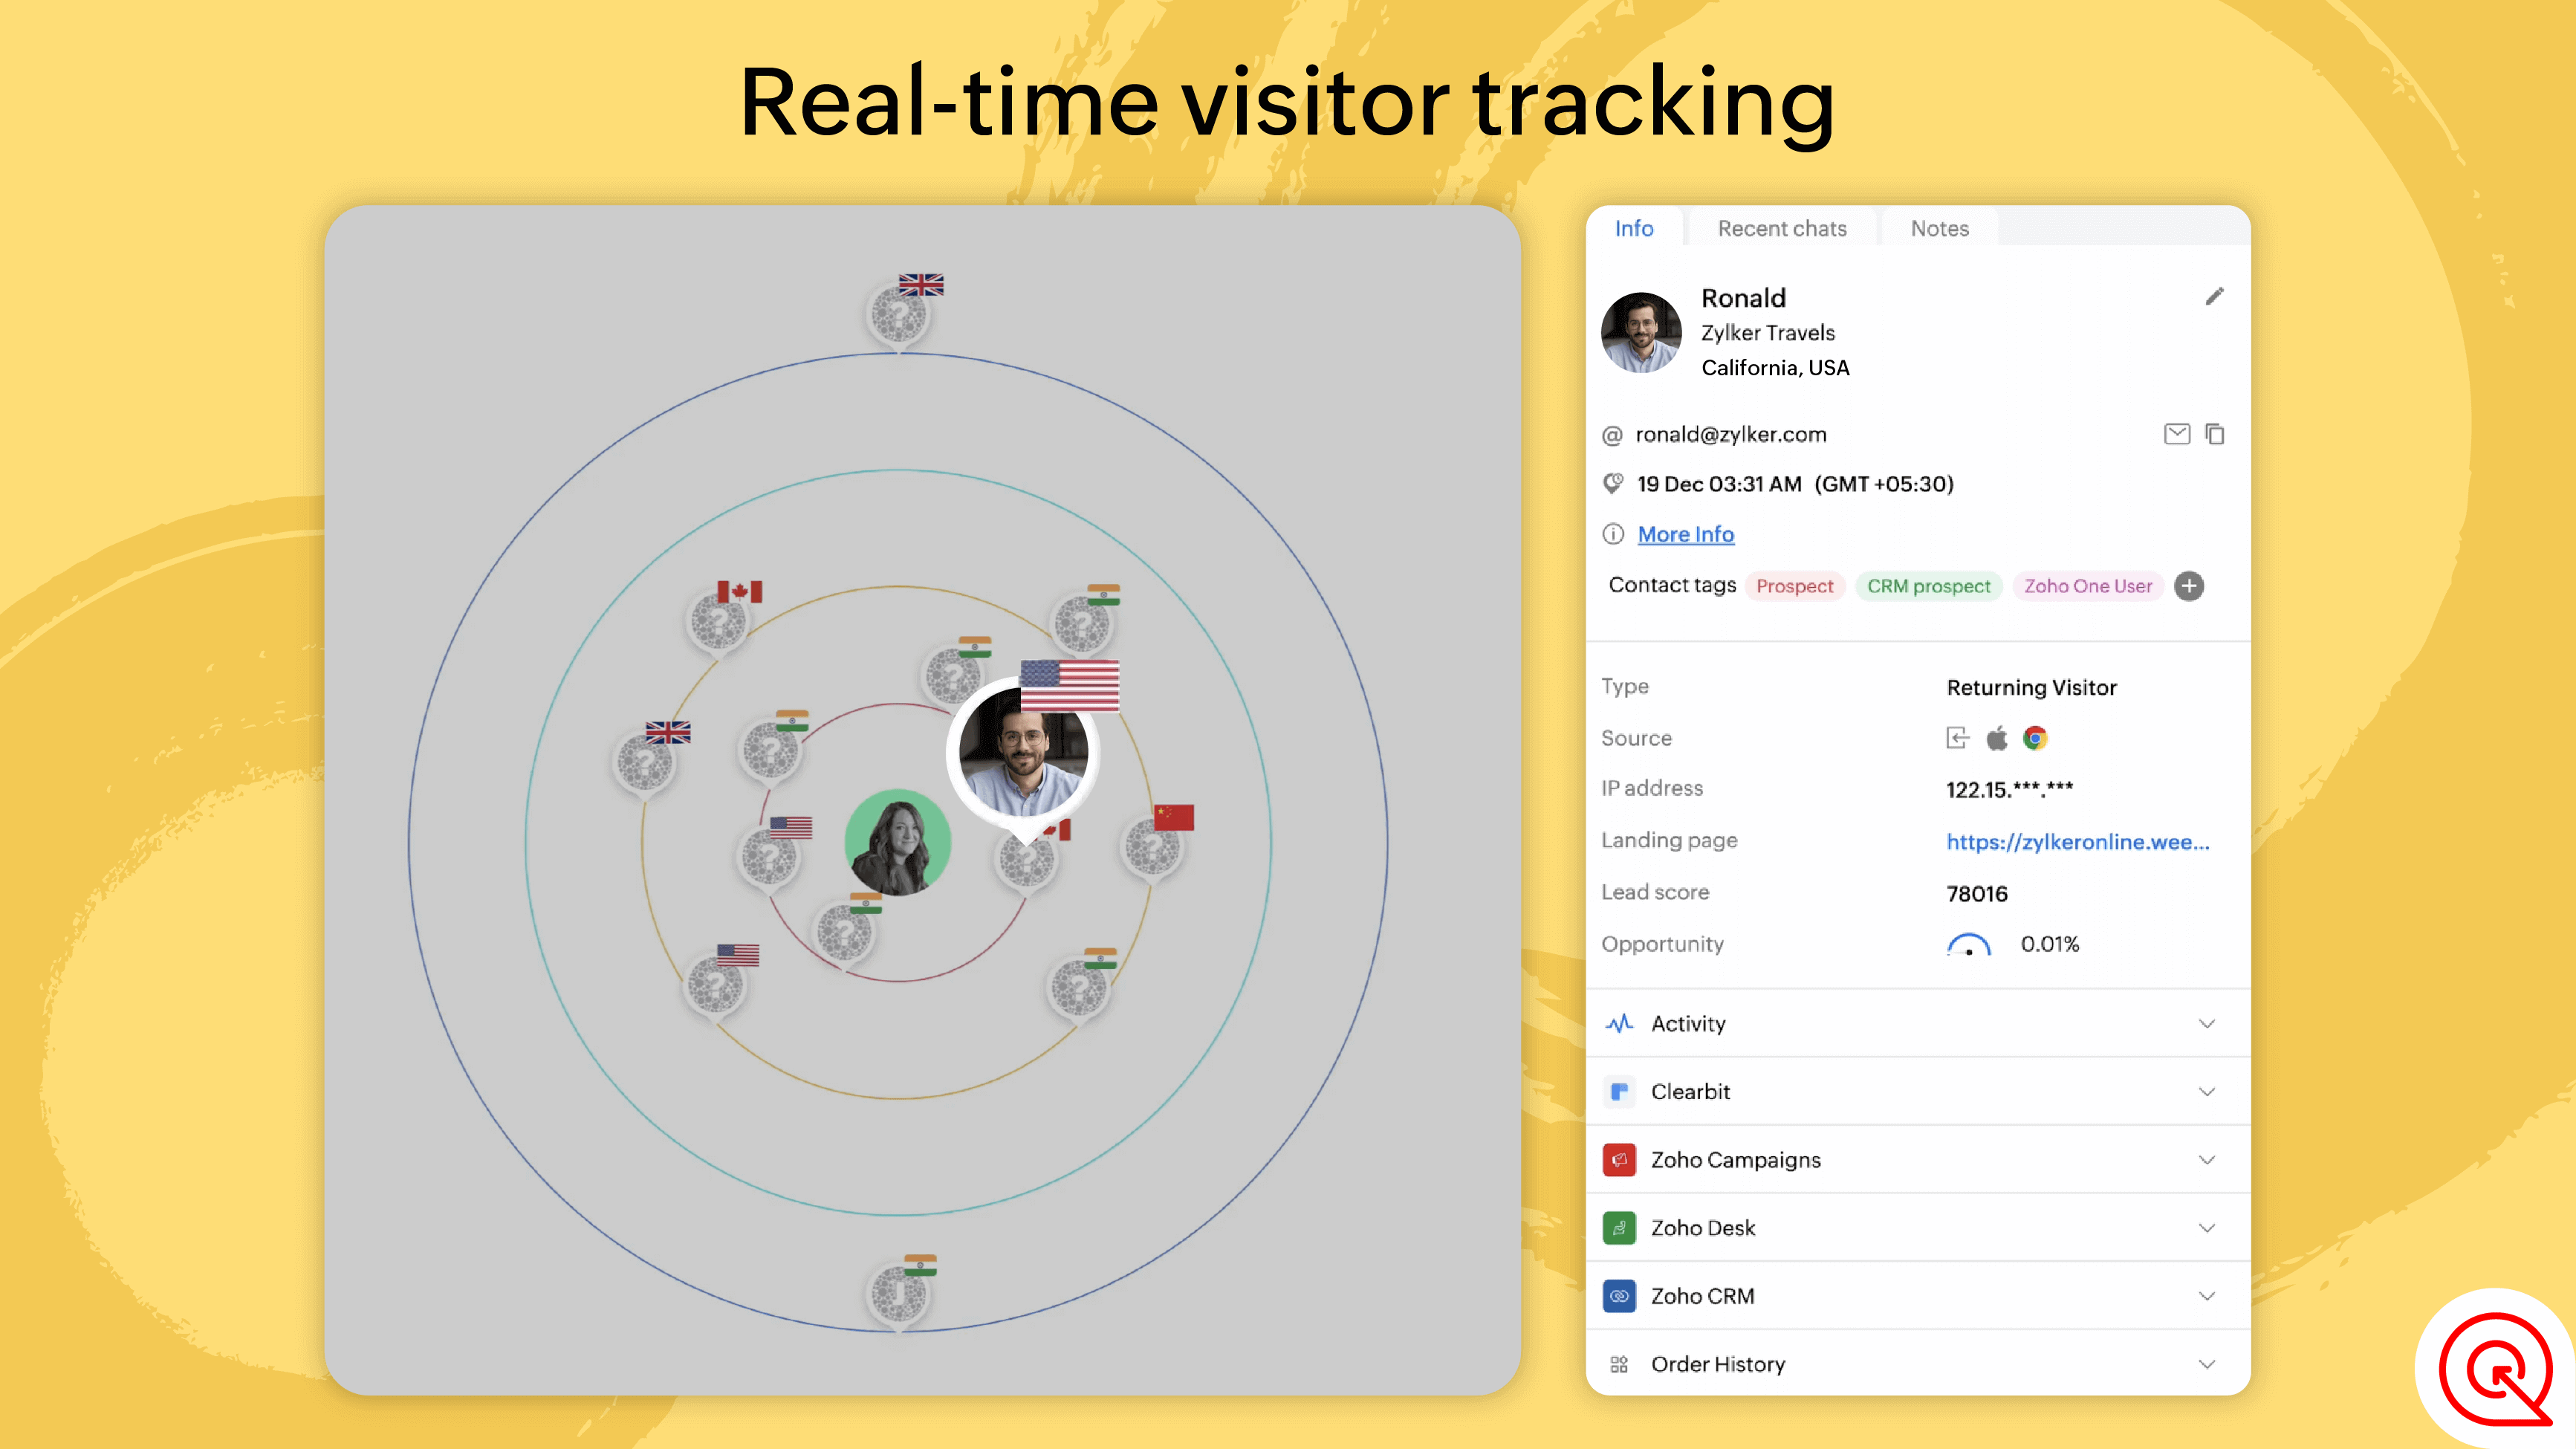 Real-time visitor tracking software